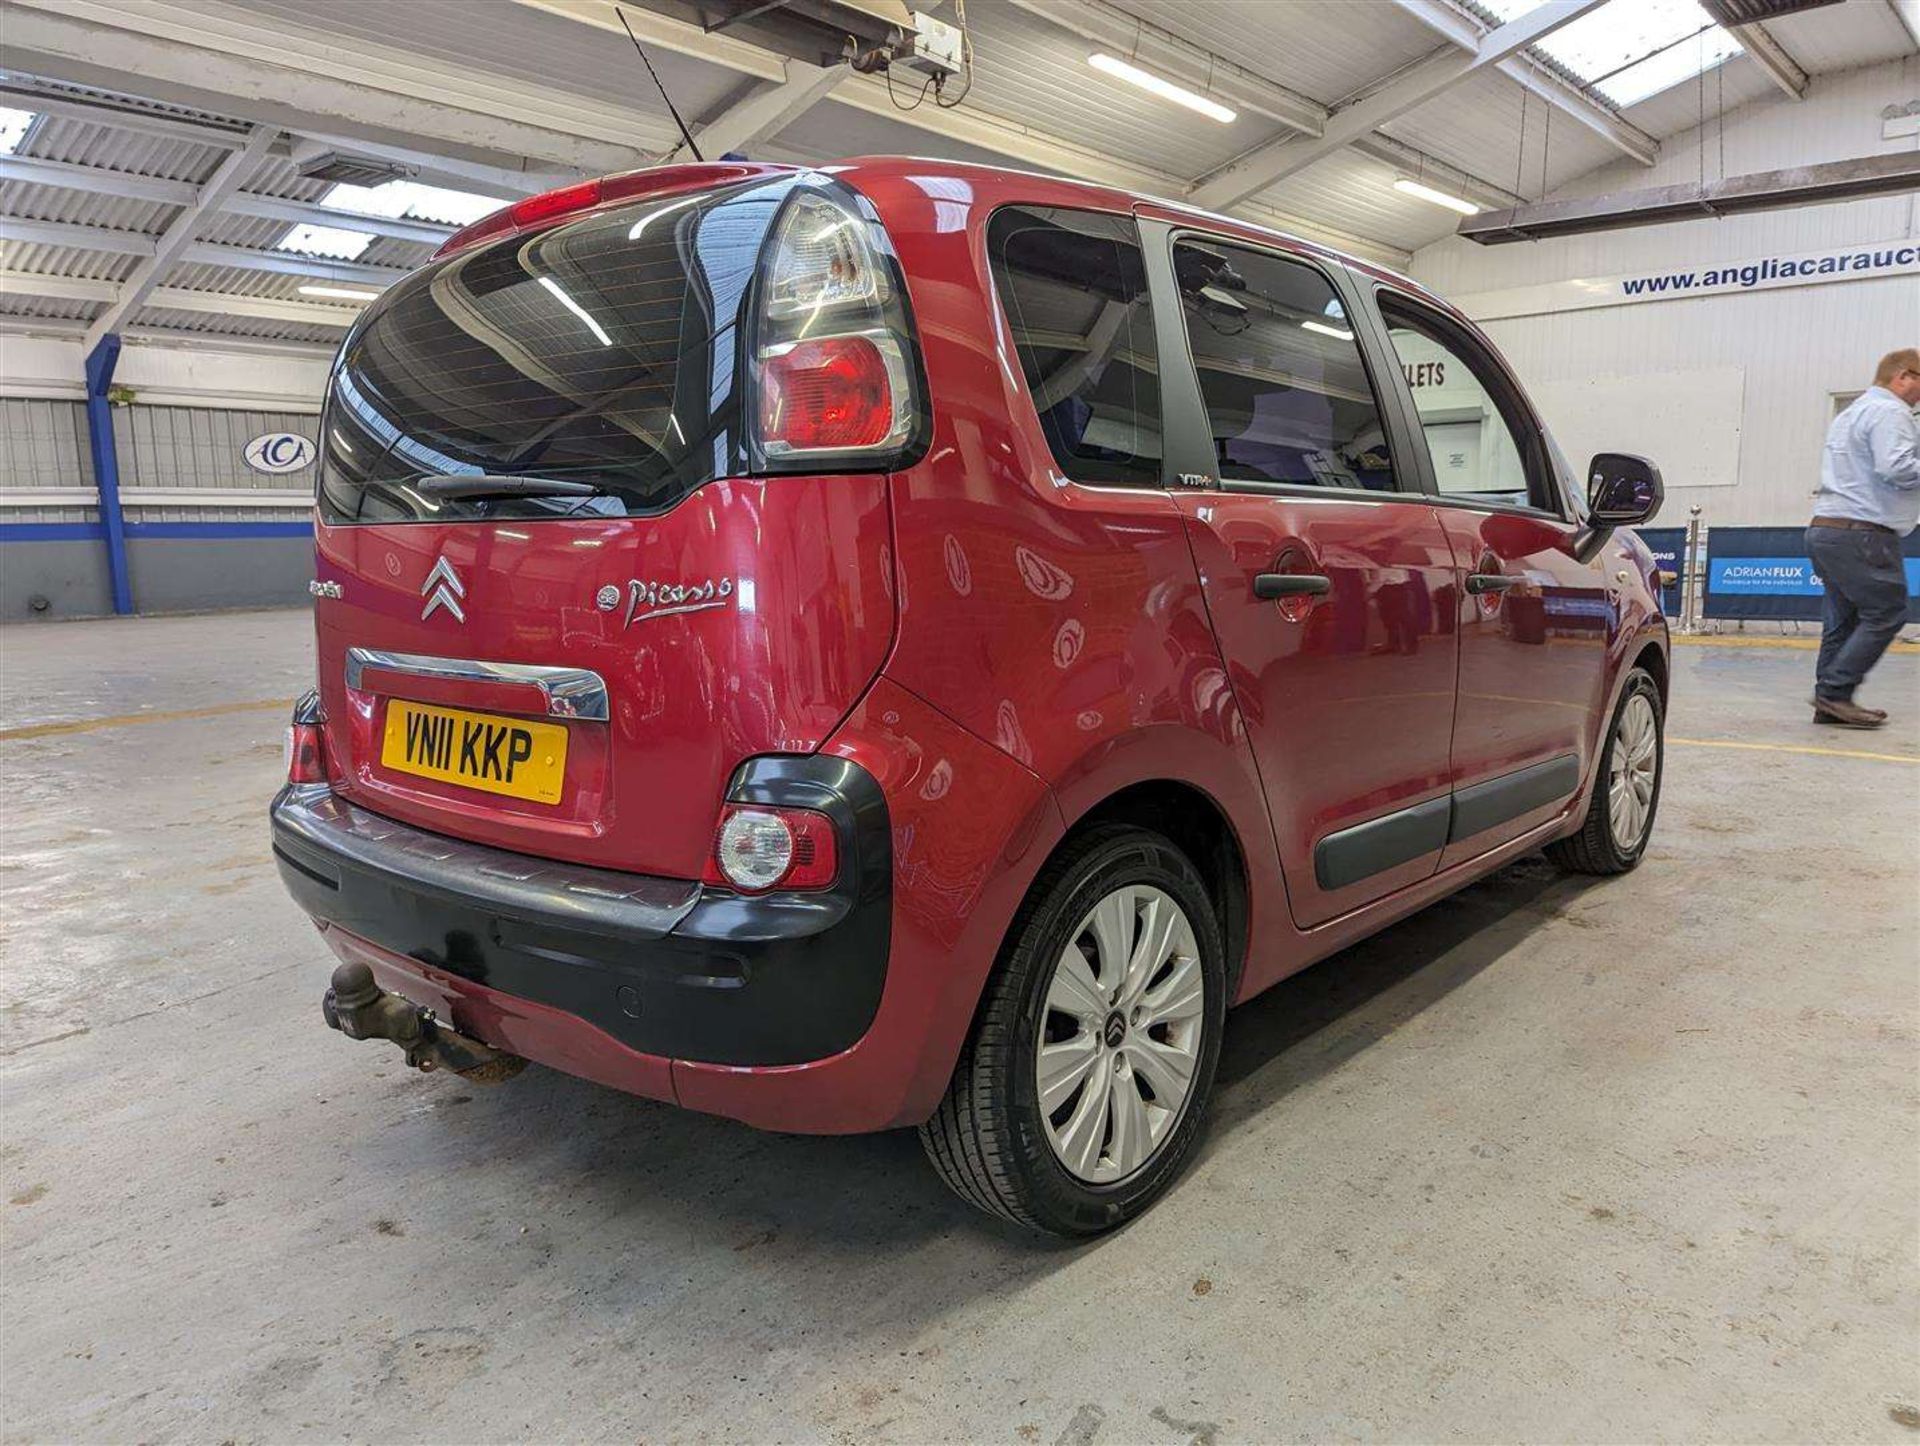 2011 CITROEN C3 PICASSO VTR+ HDI - Image 9 of 28